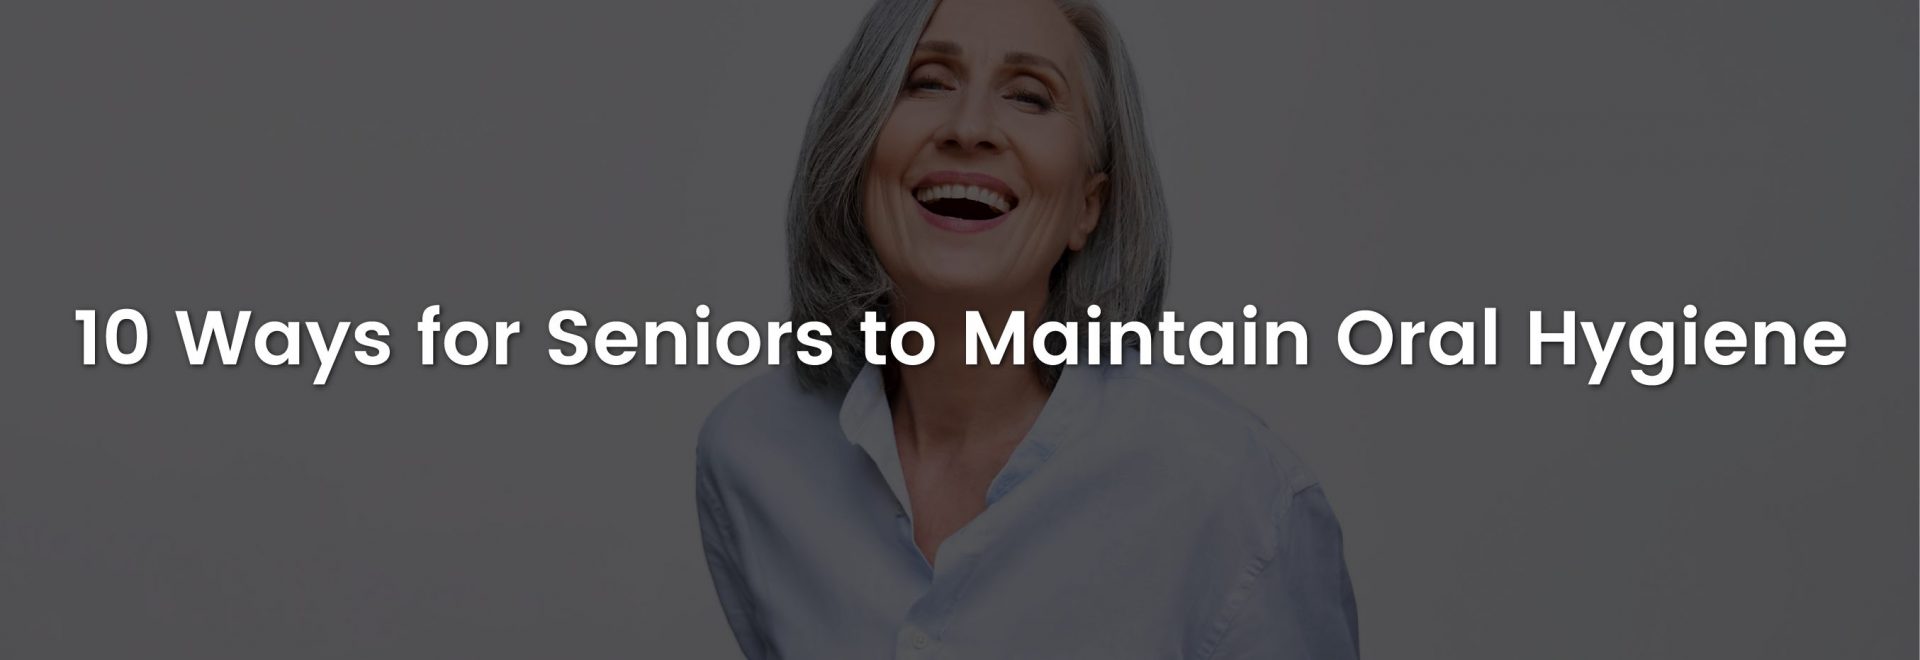 10 Ways to Maintain Good Oral Hygiene in Seniors | Banner Image